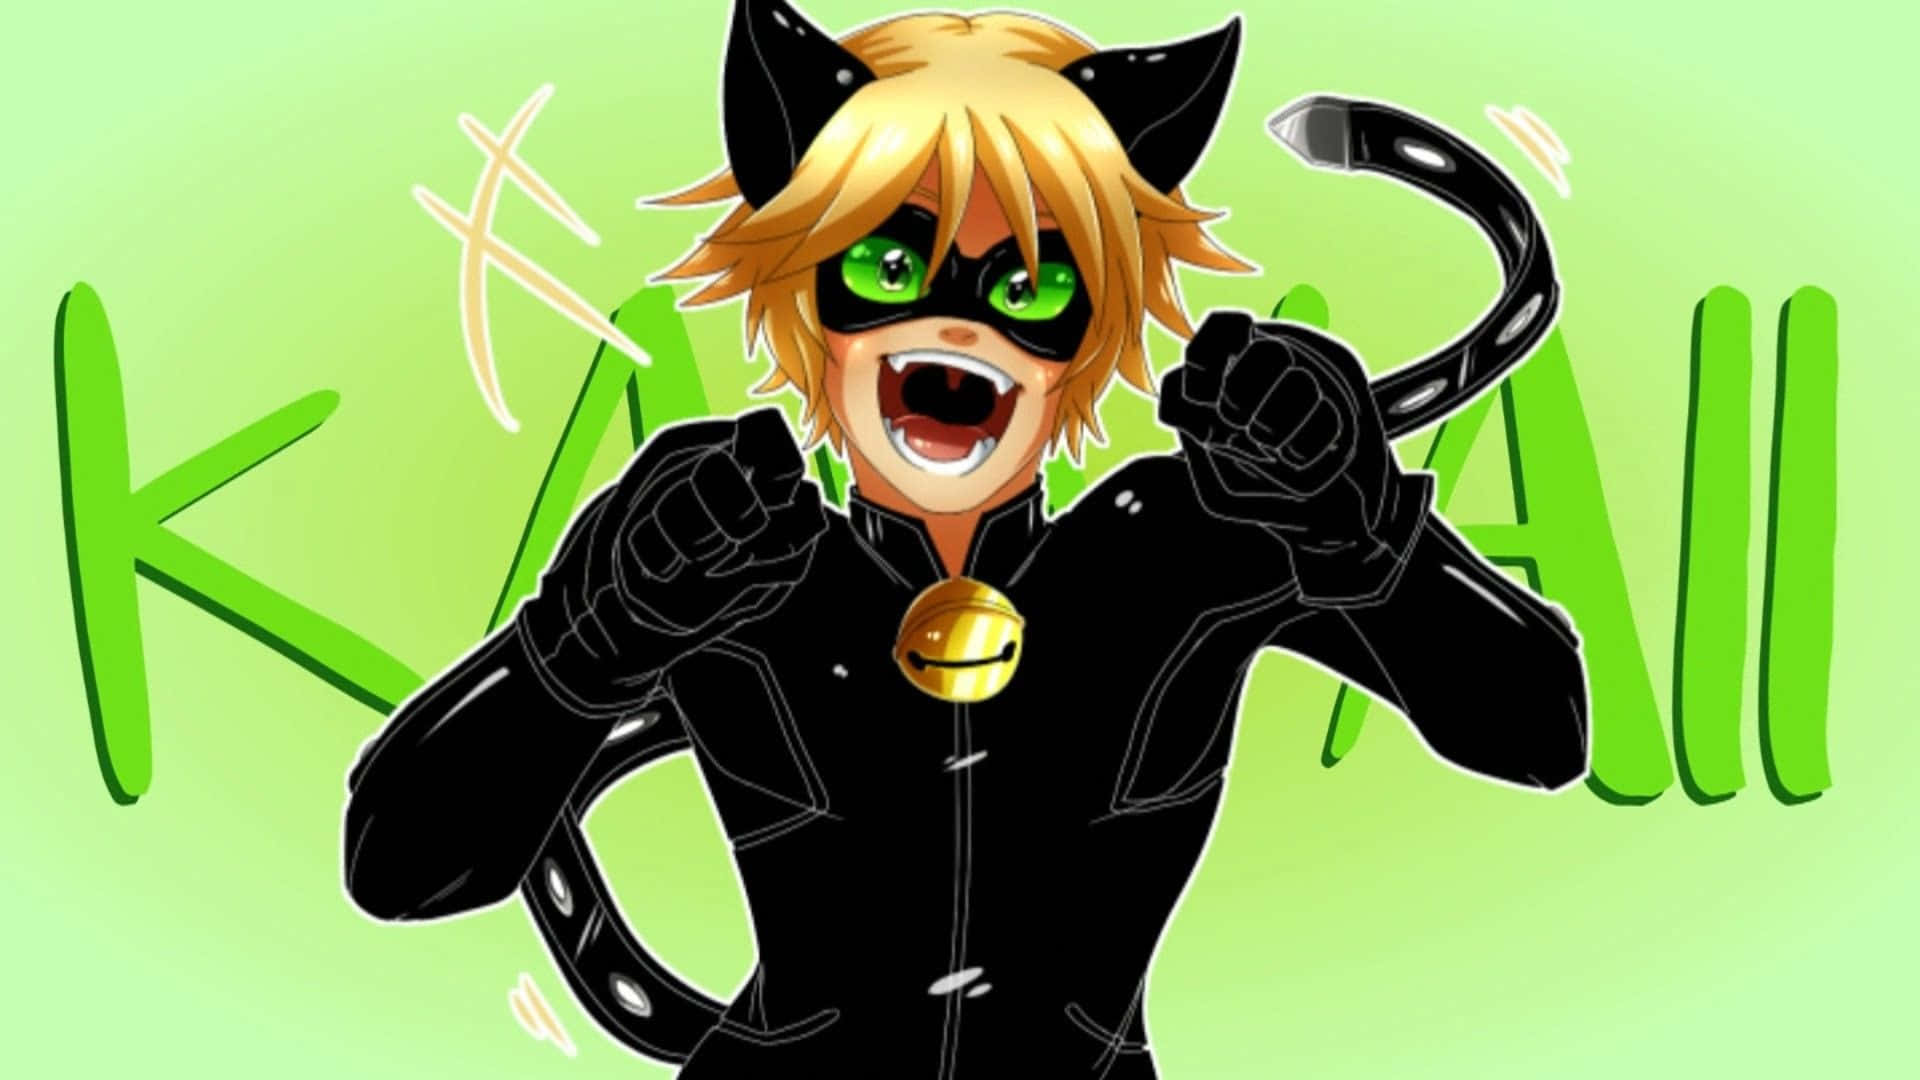 "Catching the Night Prowler - Chat Noir" Wallpaper